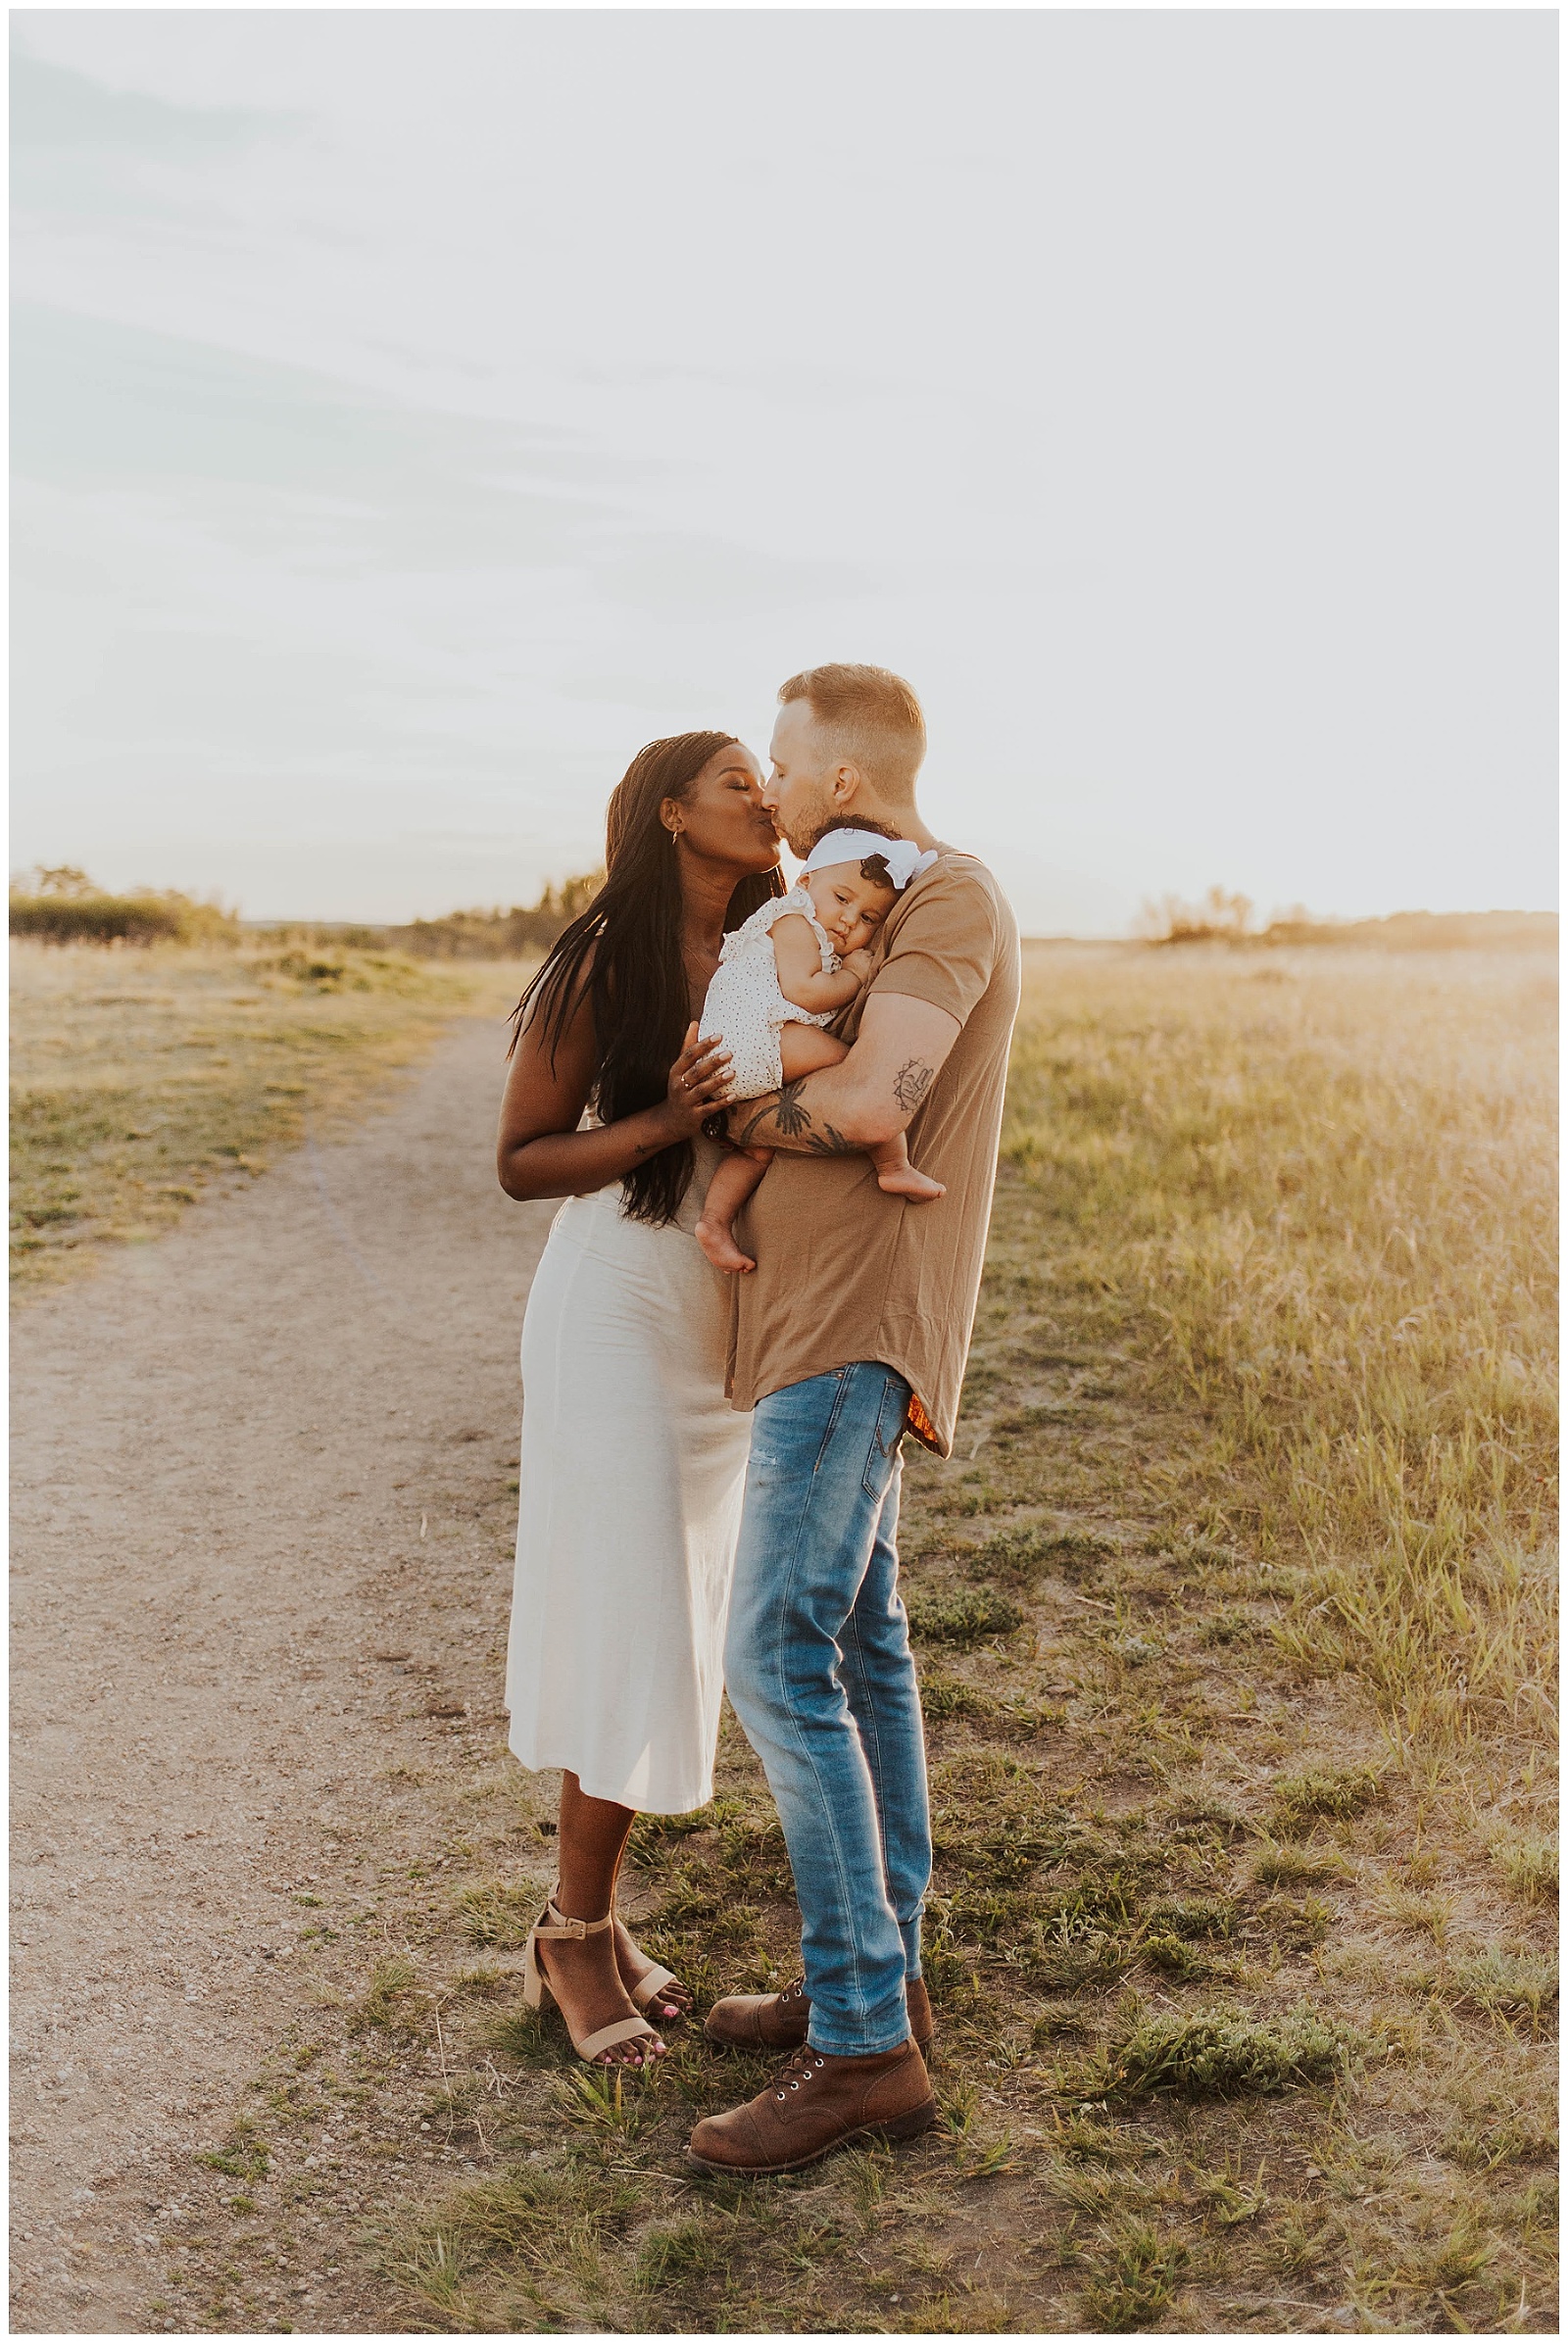 Sarah Rolles Photography family photography - Family photo session checklist